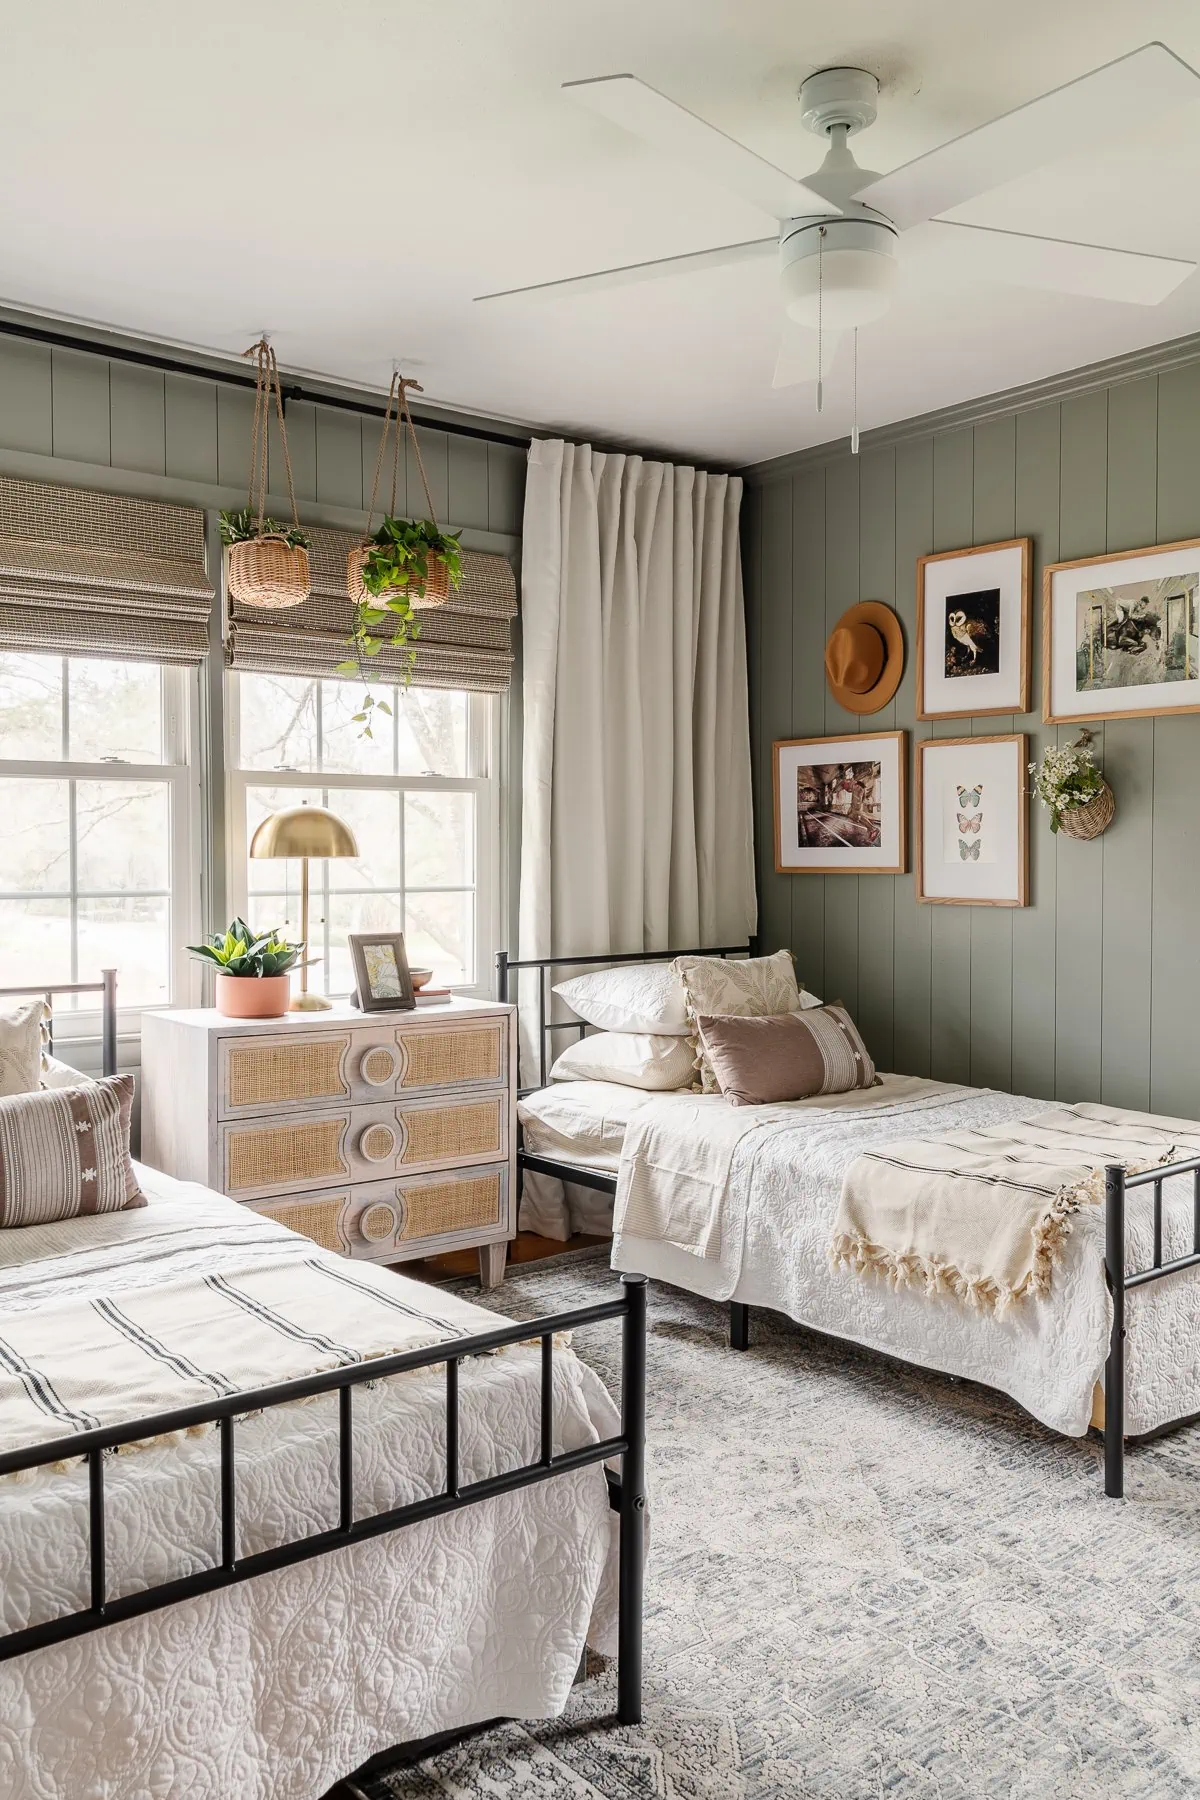 When it comes to teenage girl bedroom ideas, colors play a crucial role. The color scheme you choose will set the tone for the entire room. A minimalist approach with a neutral color palette can create a calming atmosphere, while a colorful palette can add energy and vibrancy.